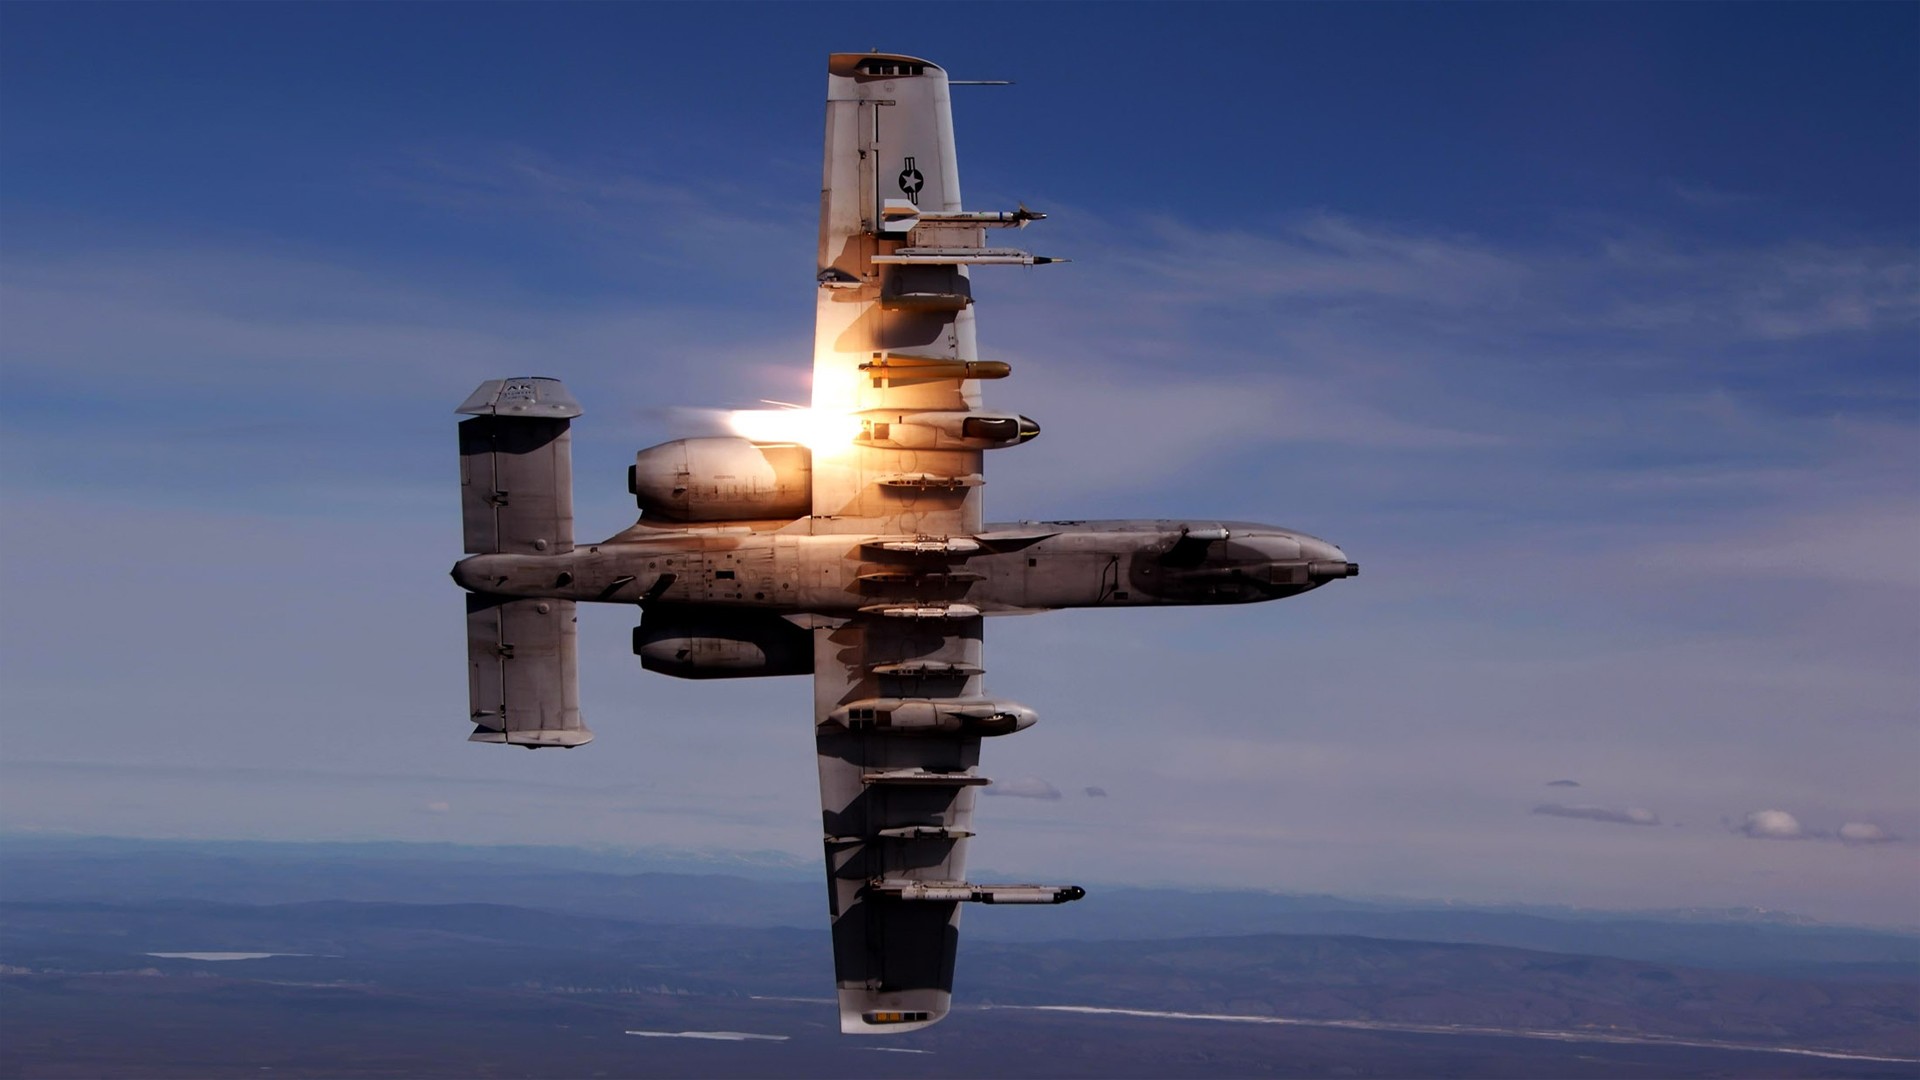 General 1920x1080 airplane Warthog aircraft military aircraft Fairchild Republic A-10 Thunderbolt II military American aircraft vehicle sky clouds missiles bottom view